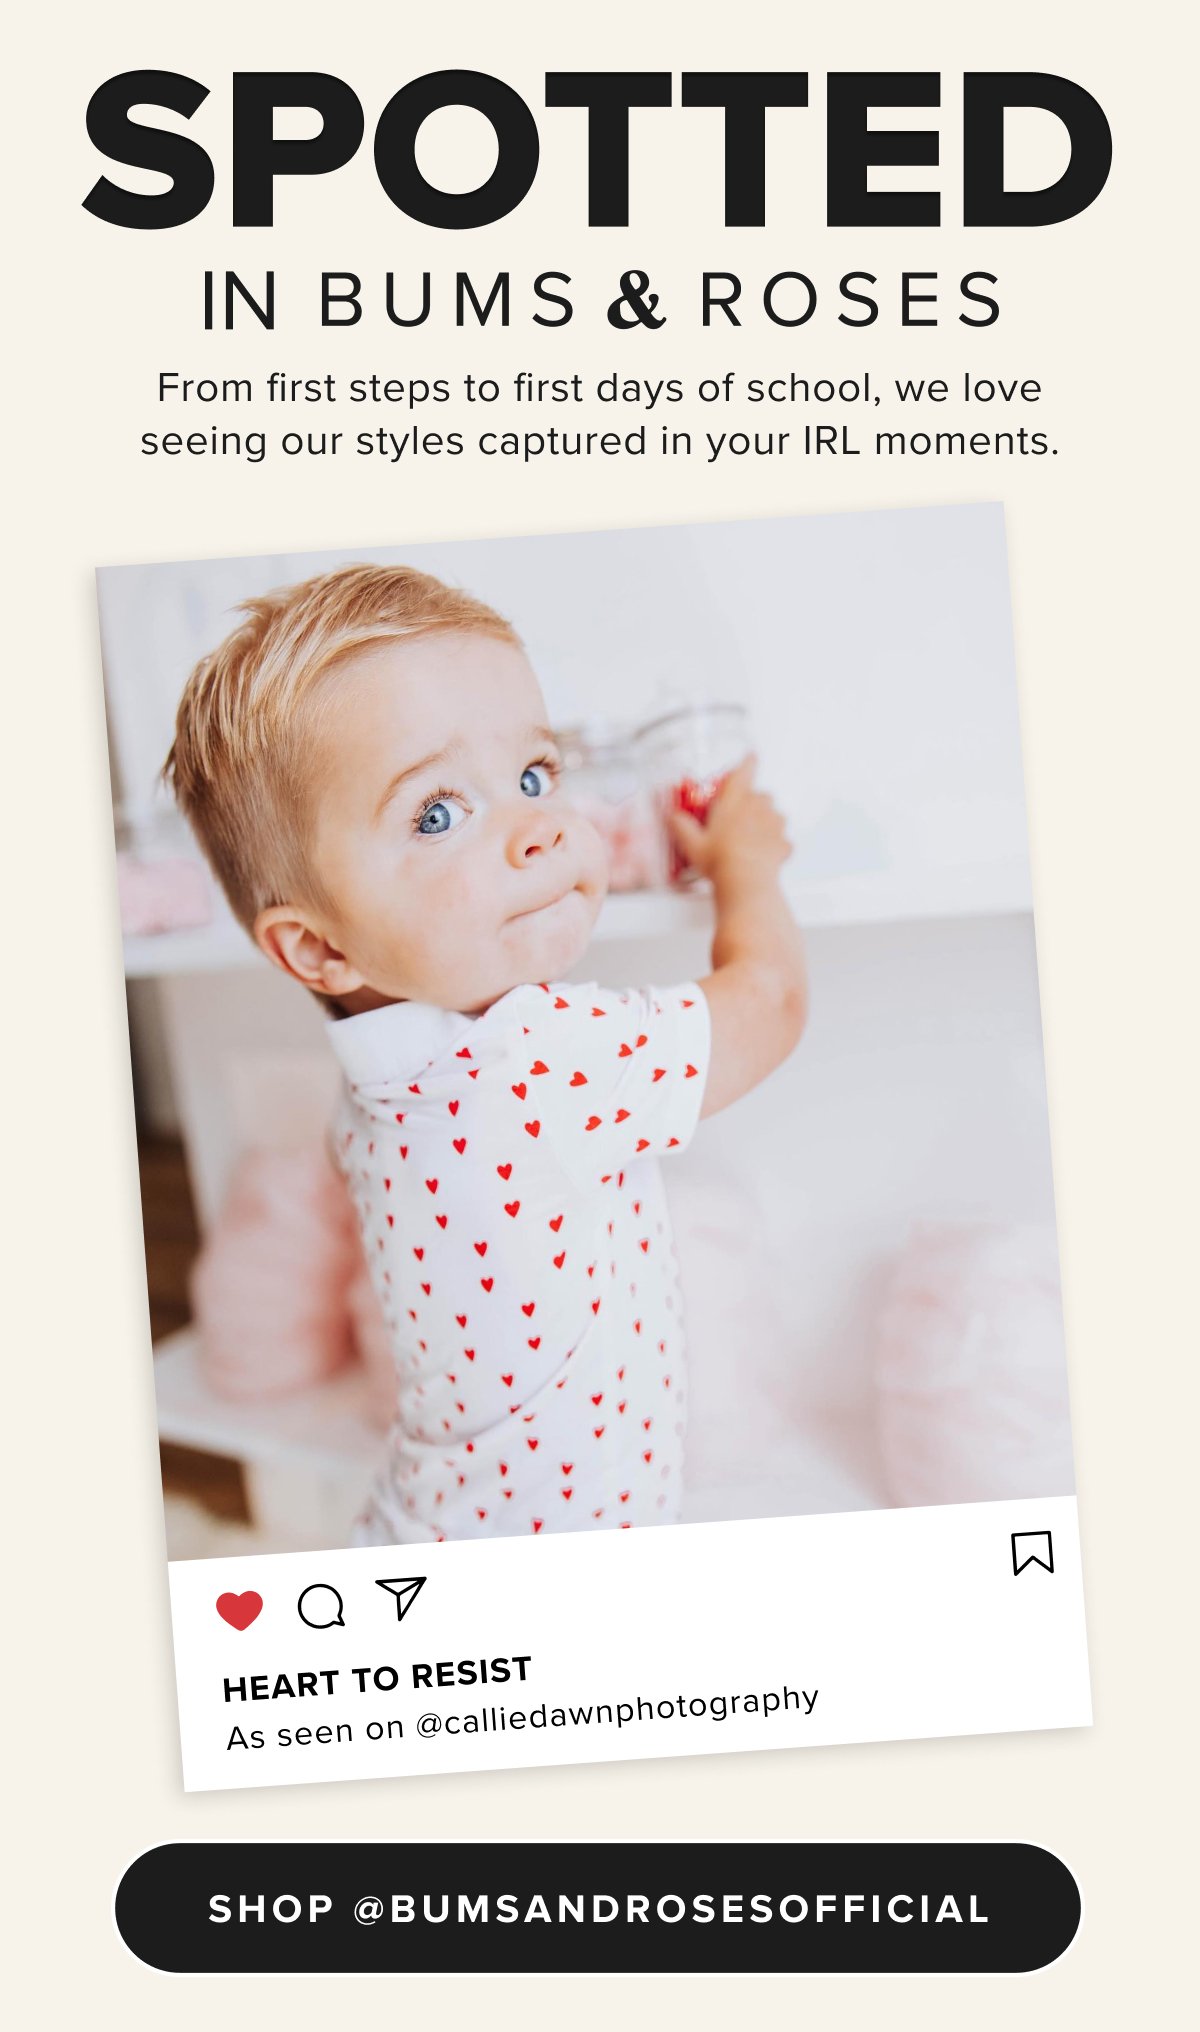 SPOTTED In Bums & Roses From first steps to first days of school, we love seeing our styles captured in your IRL moments.